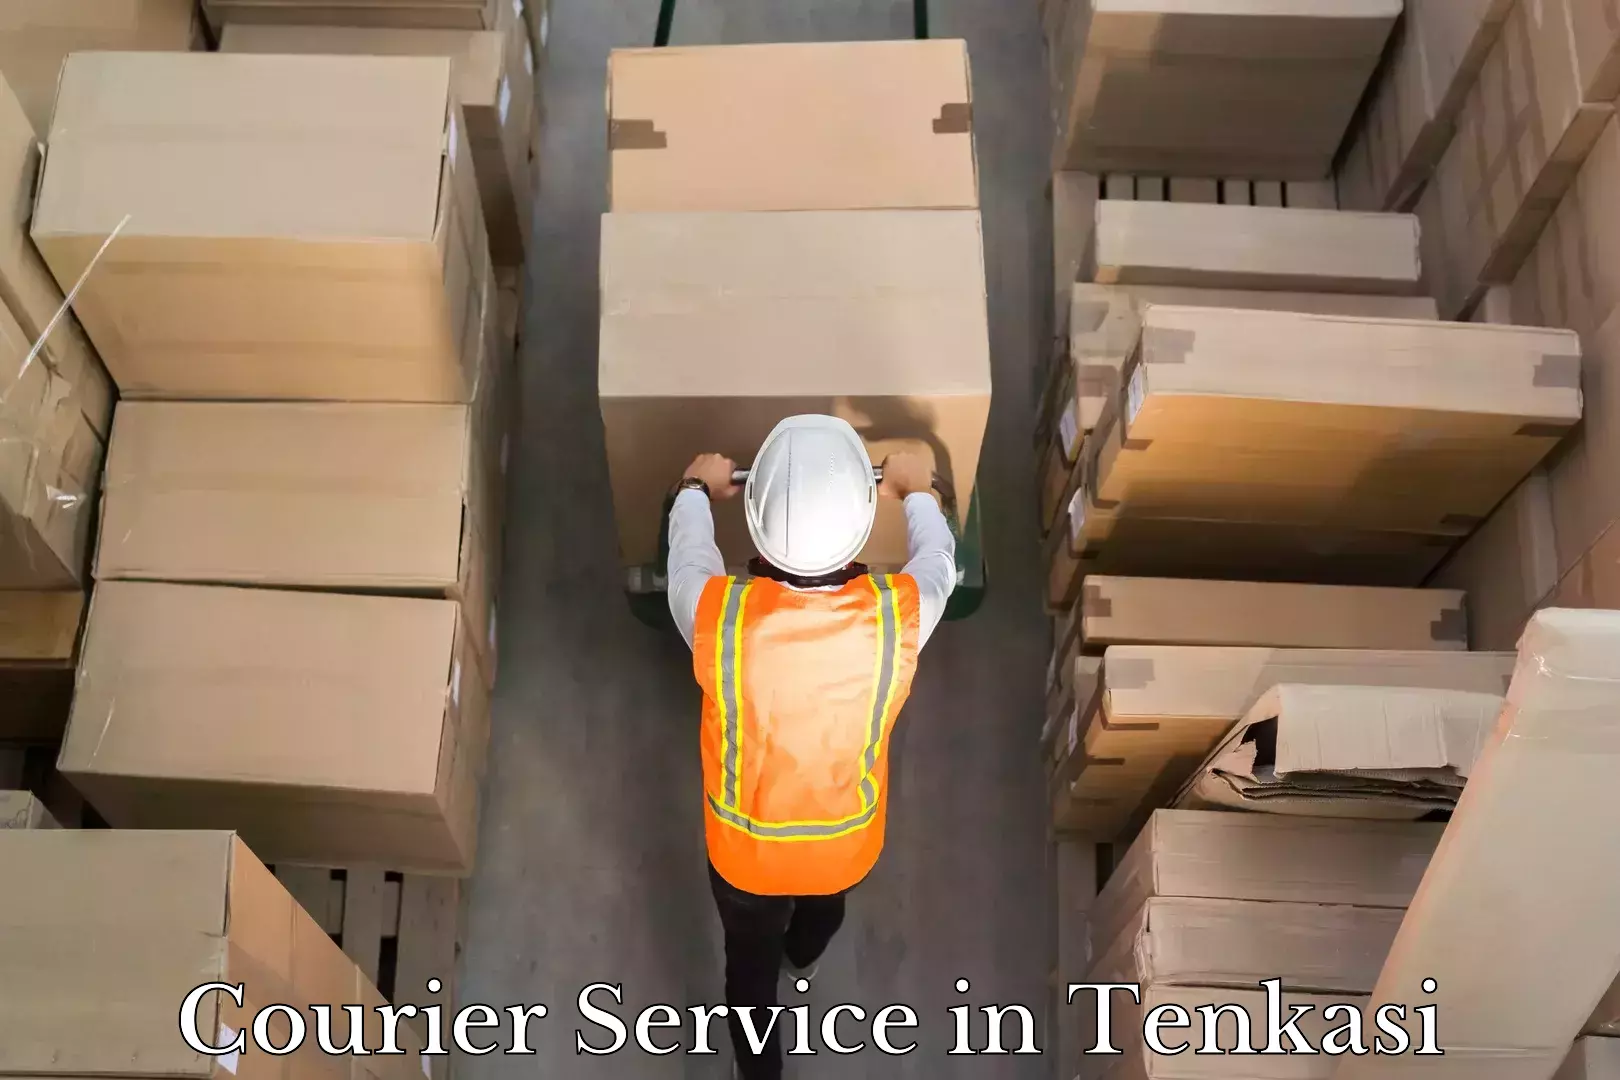 Fast shipping solutions in Tenkasi